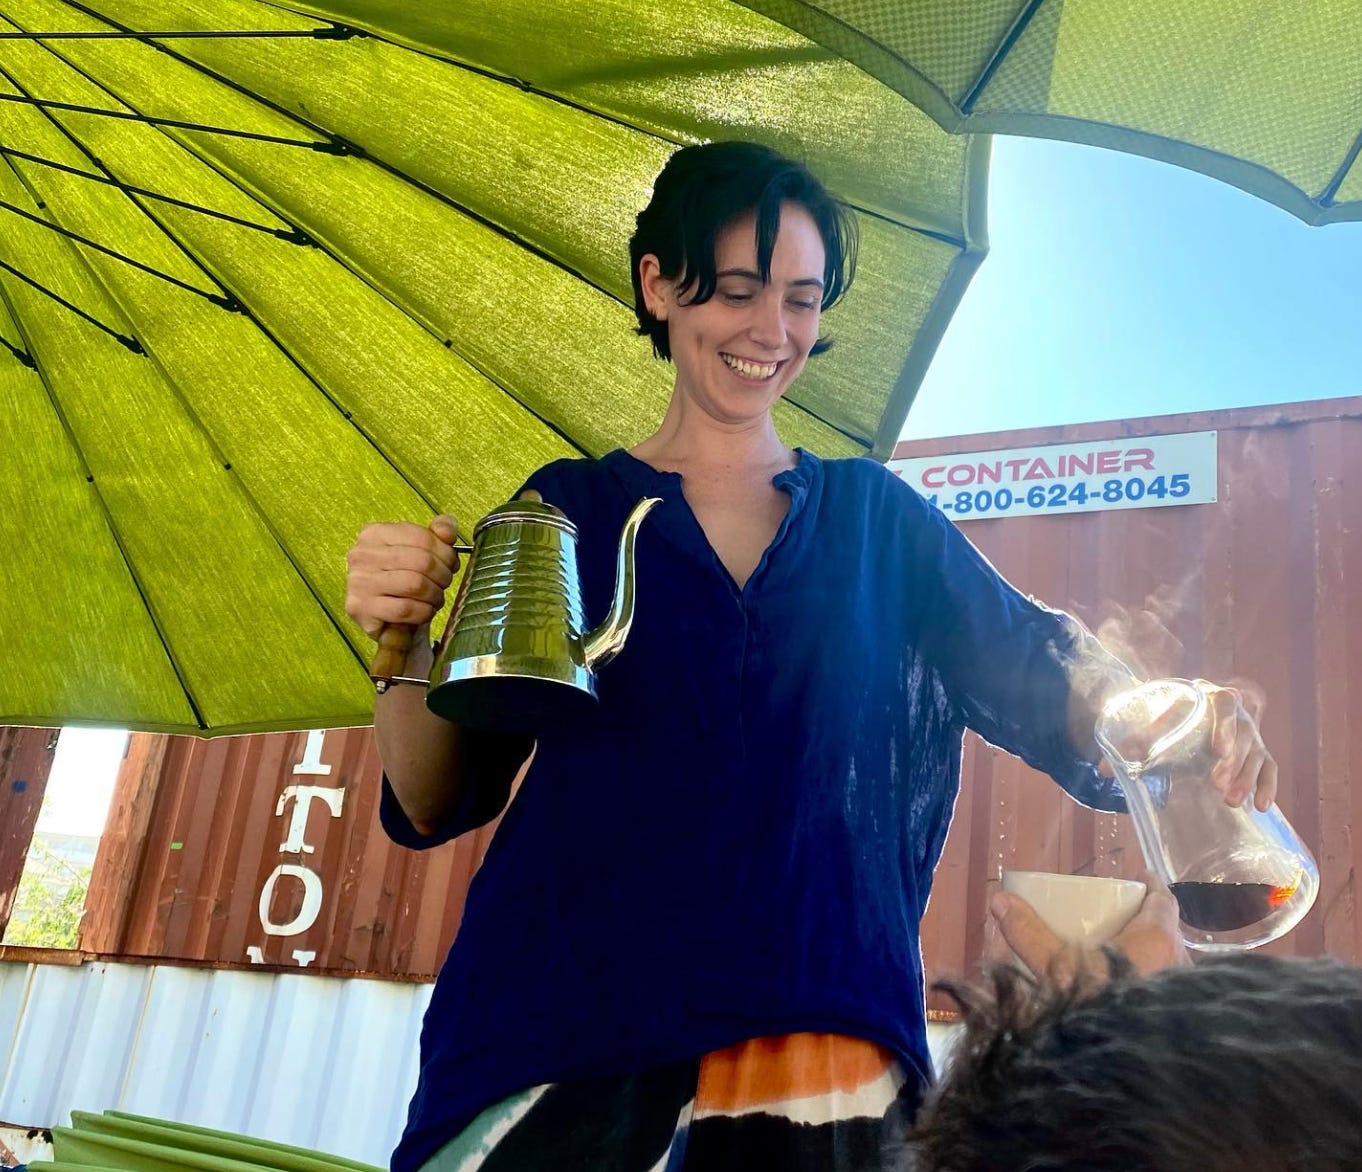 A woman with short black hair wearing a navy blue blouse under a bright green umbrella holds a stainless steel water kettle in her right hand and pours coffee out of a pot into a mug being held by an extended arm from out of frame.